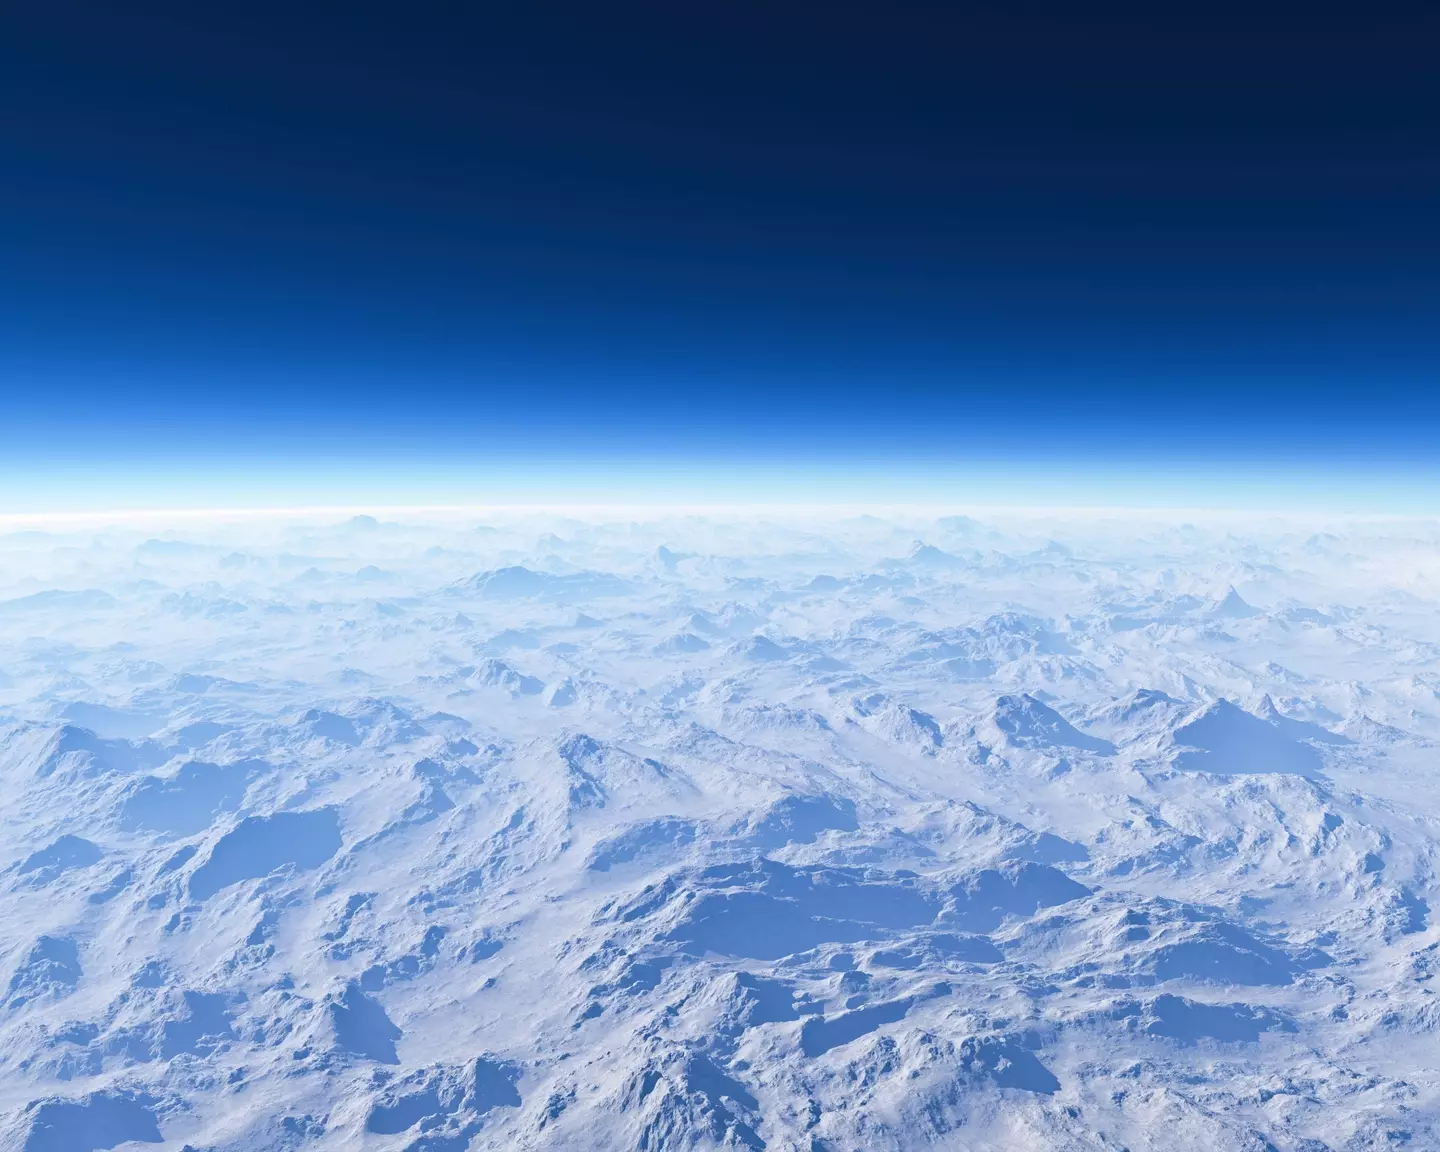 A scientist has discovered a ‘huge’ ozone hole that he claims has been present for over 30 years.